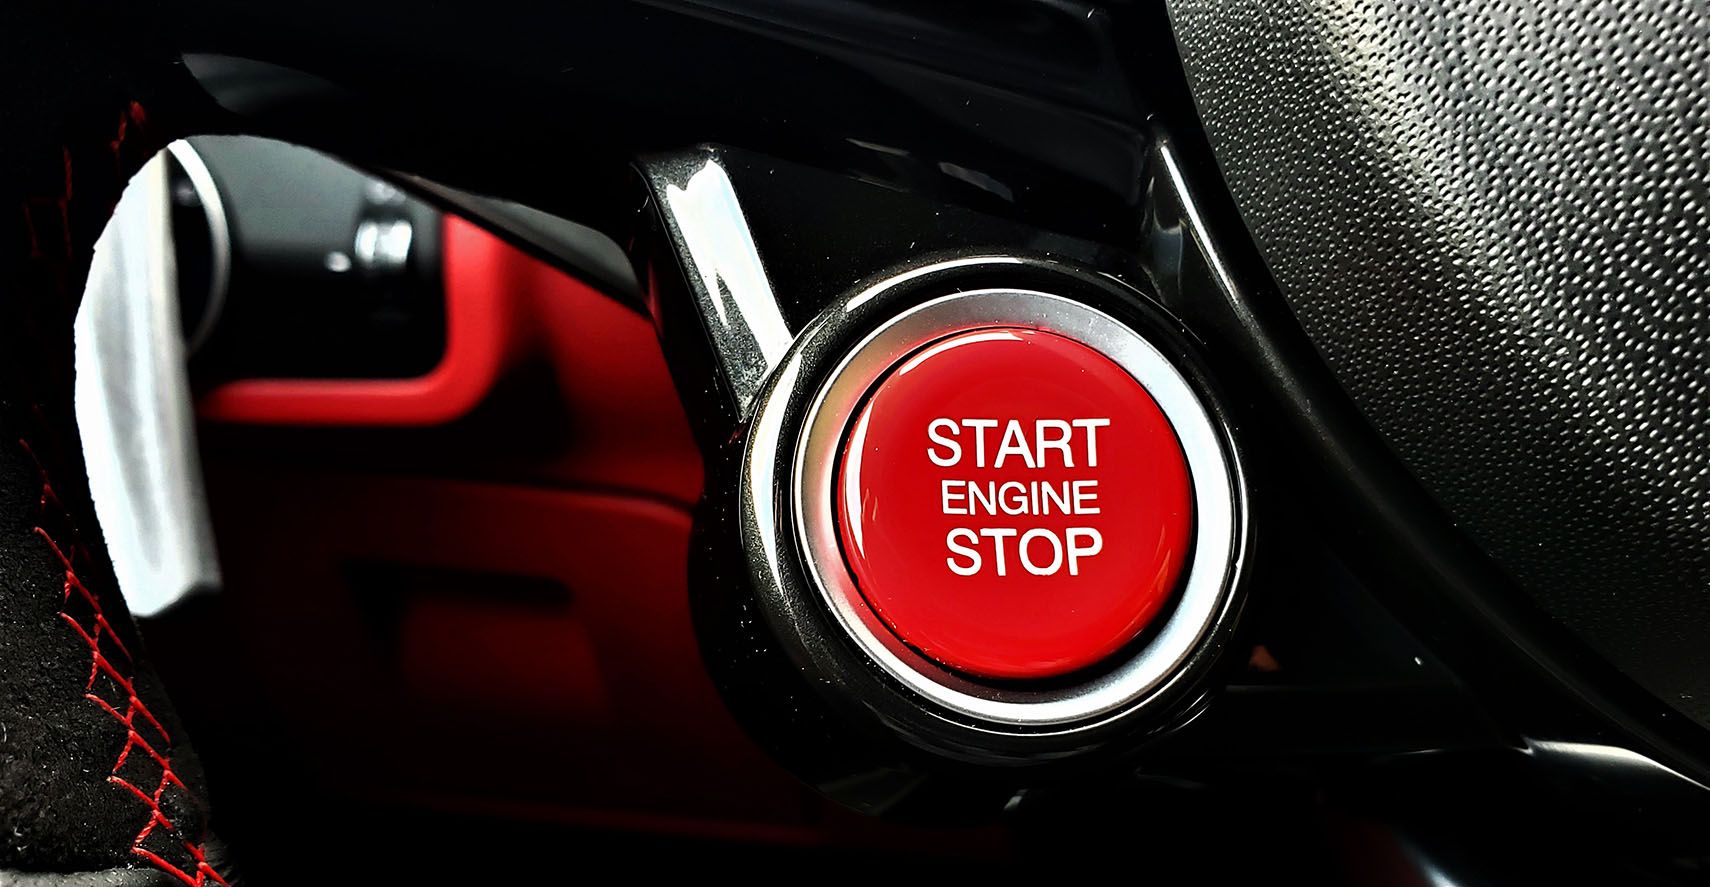 Just like with a Ferrari, this steering wheel-mounted engine start button gets things going.